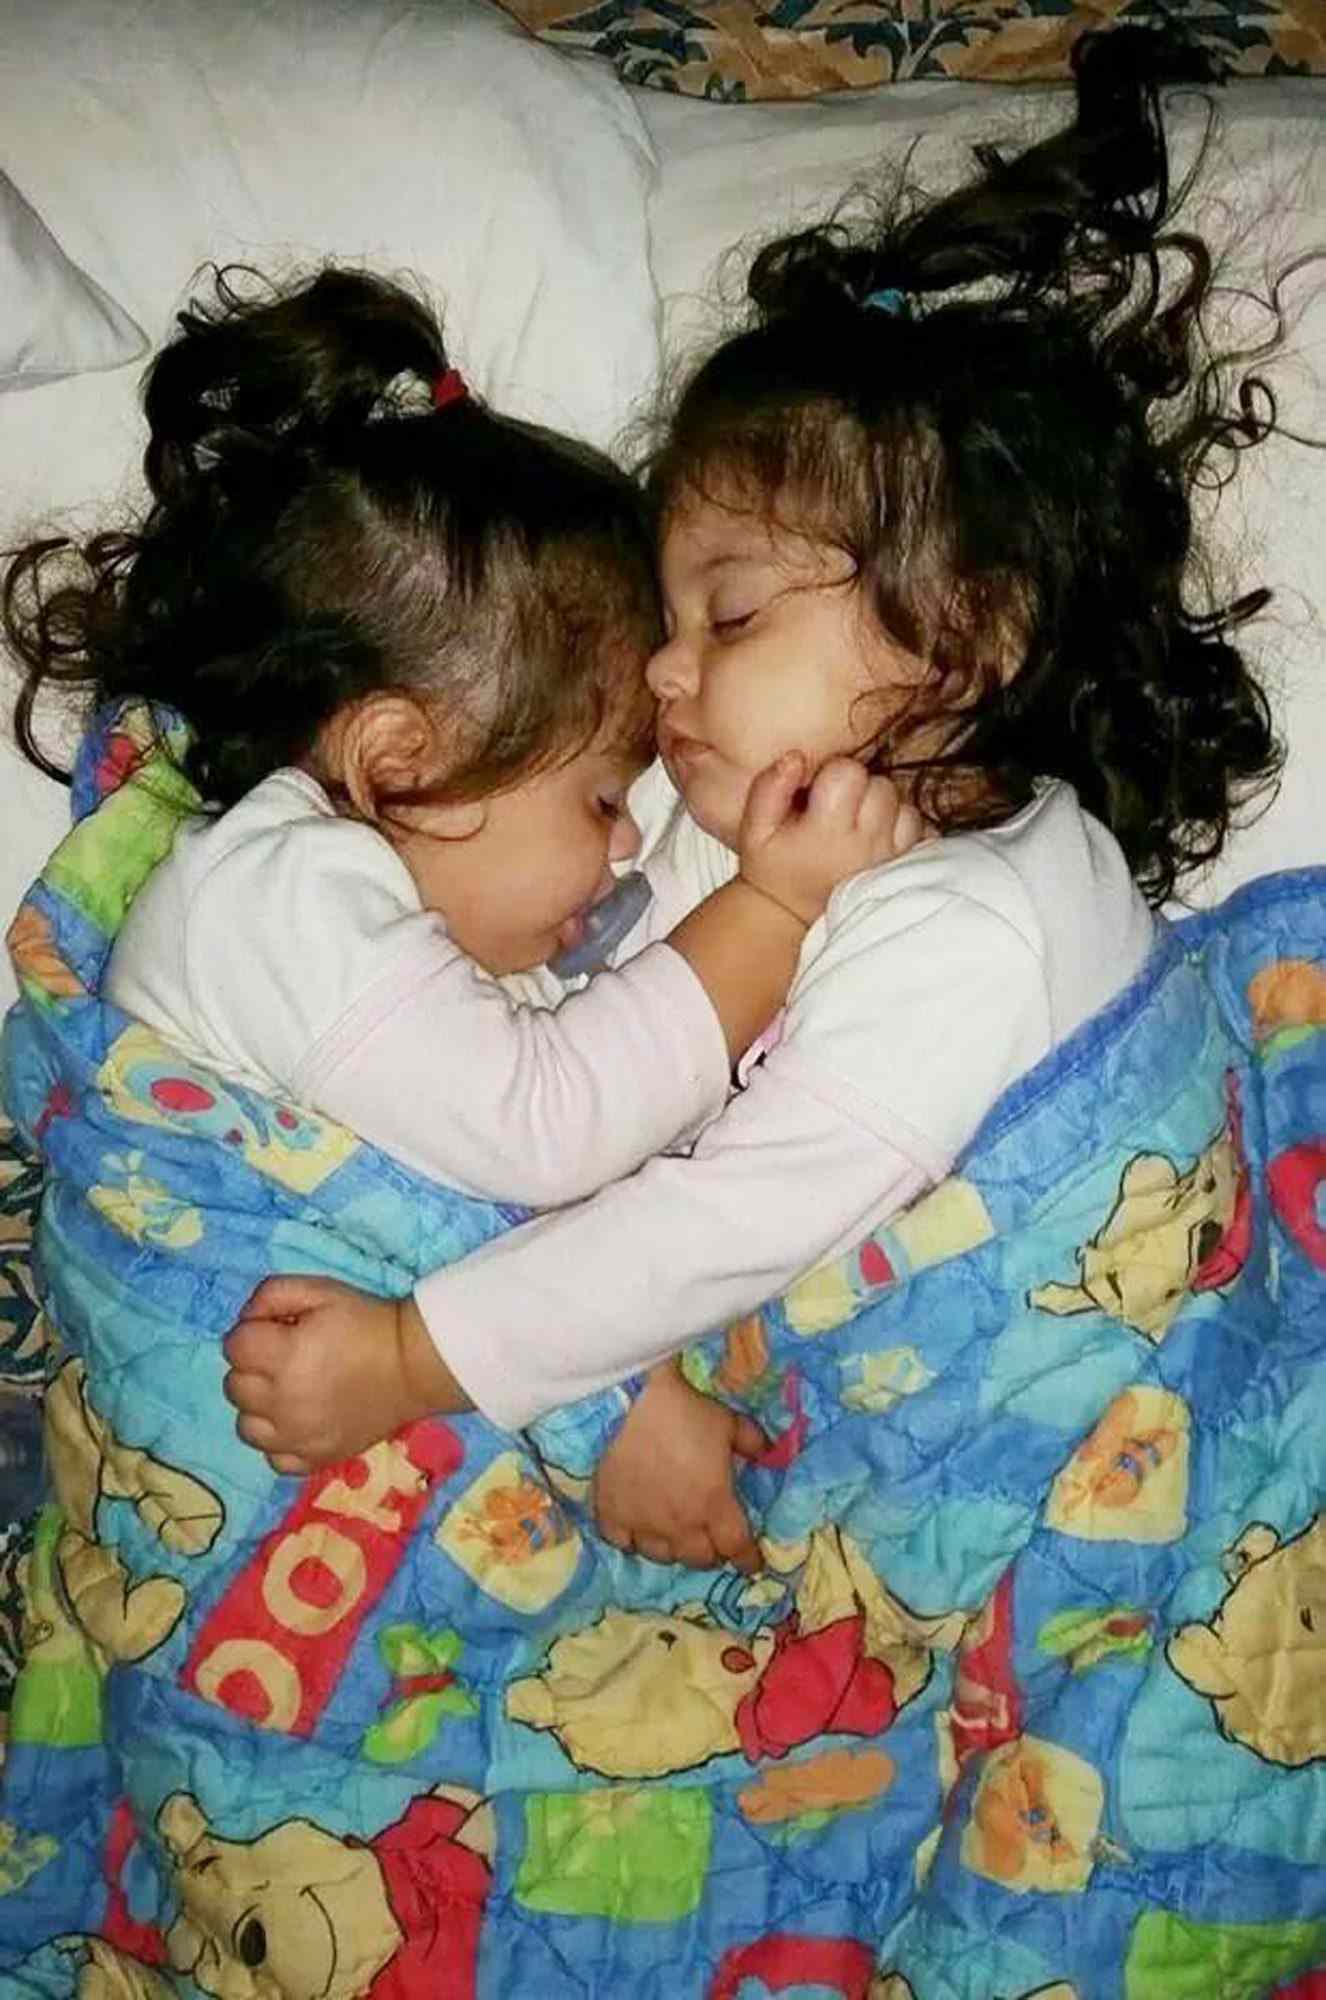 4YearOld Twin Girls Cope with One Sister's Cancer